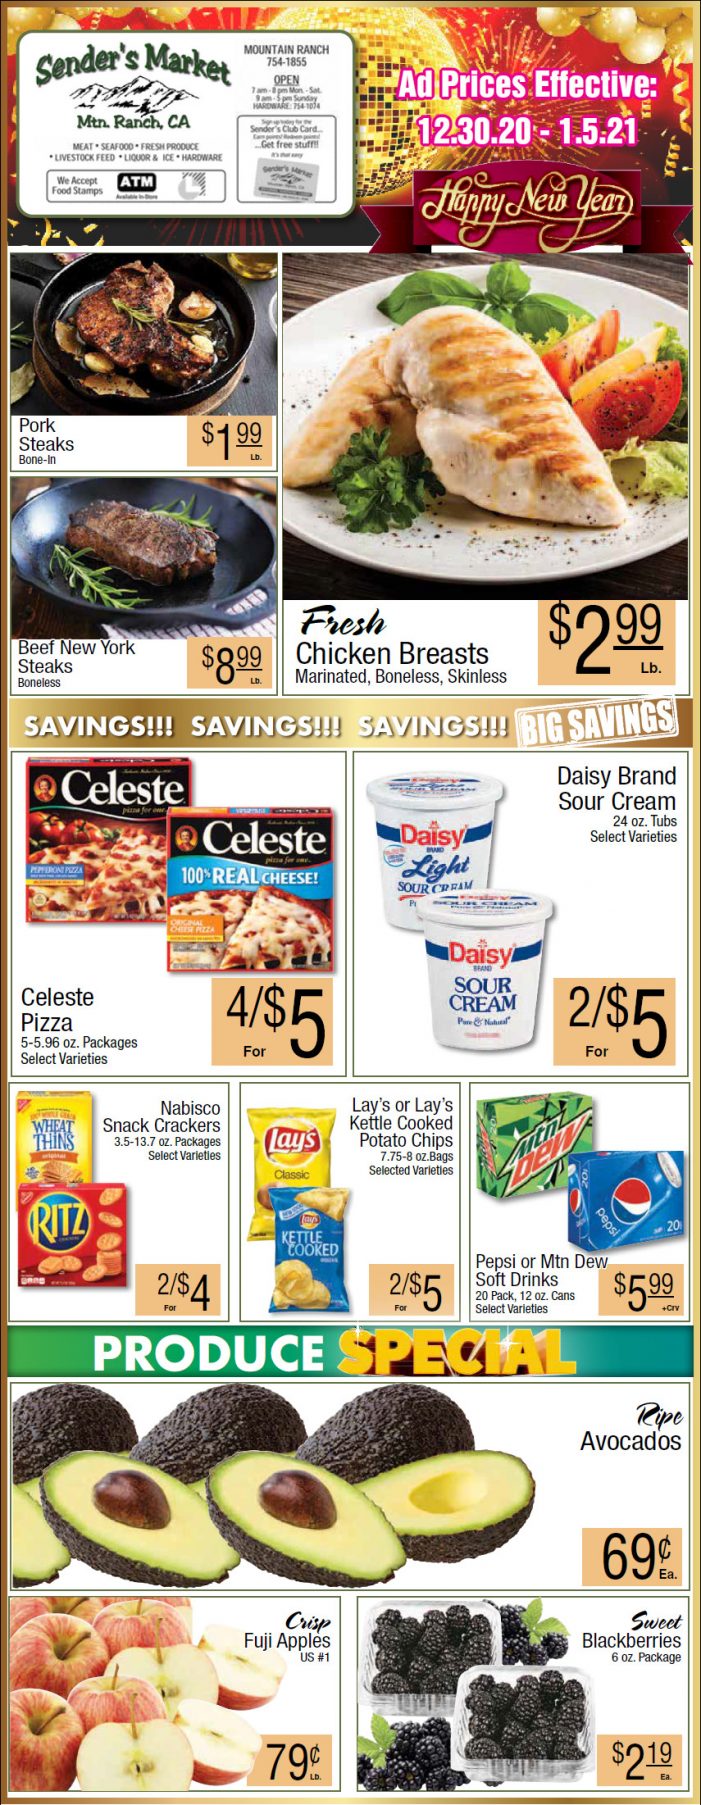 Sender’s Market’s Weekly Ad & Grocery Specials Through January 5th!  Shop Local & Save!